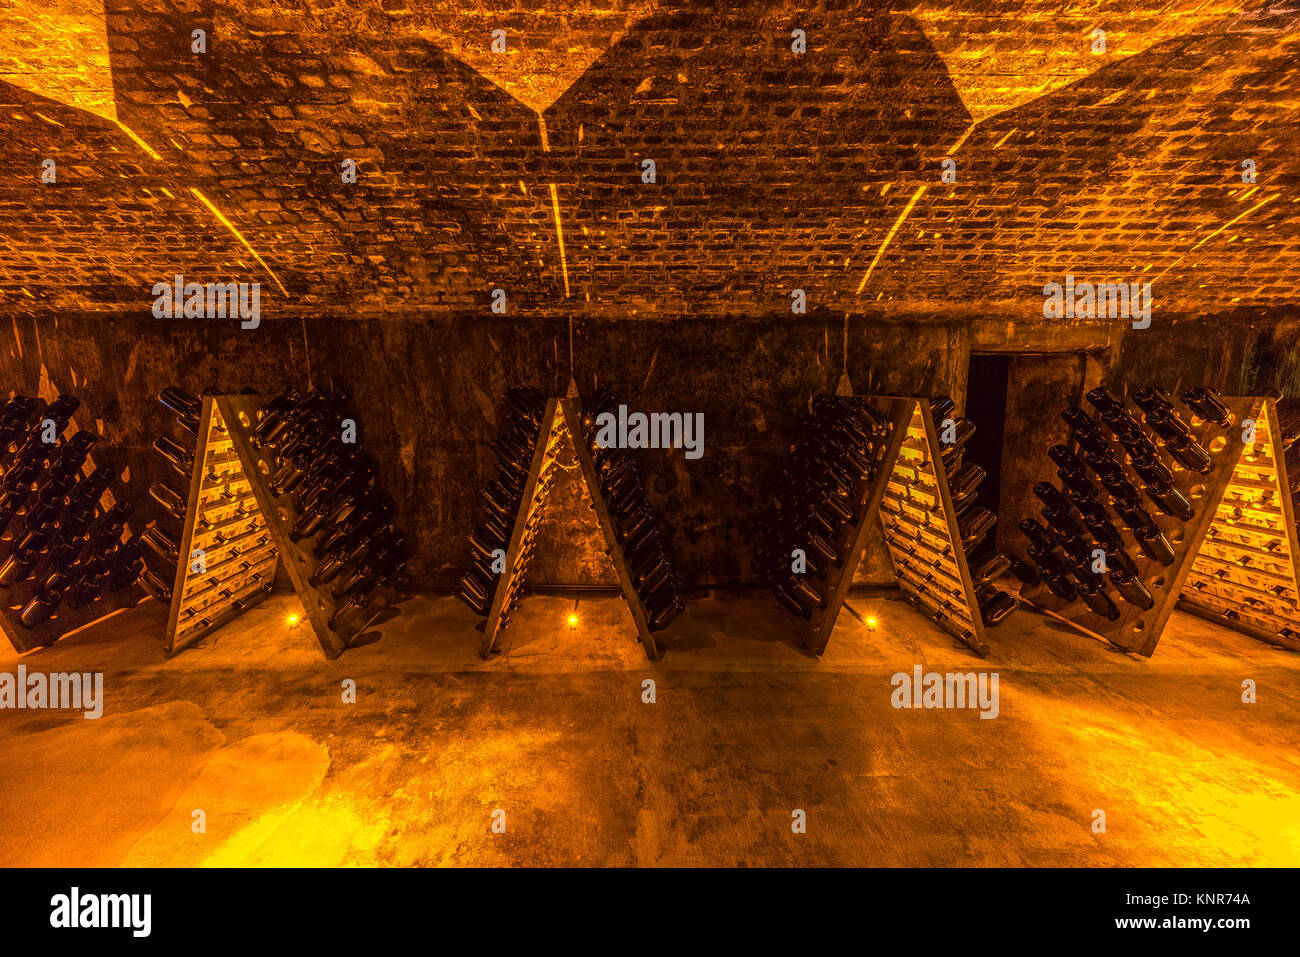 Sparkling wine bottles aging in old cellar, France Stock Photo